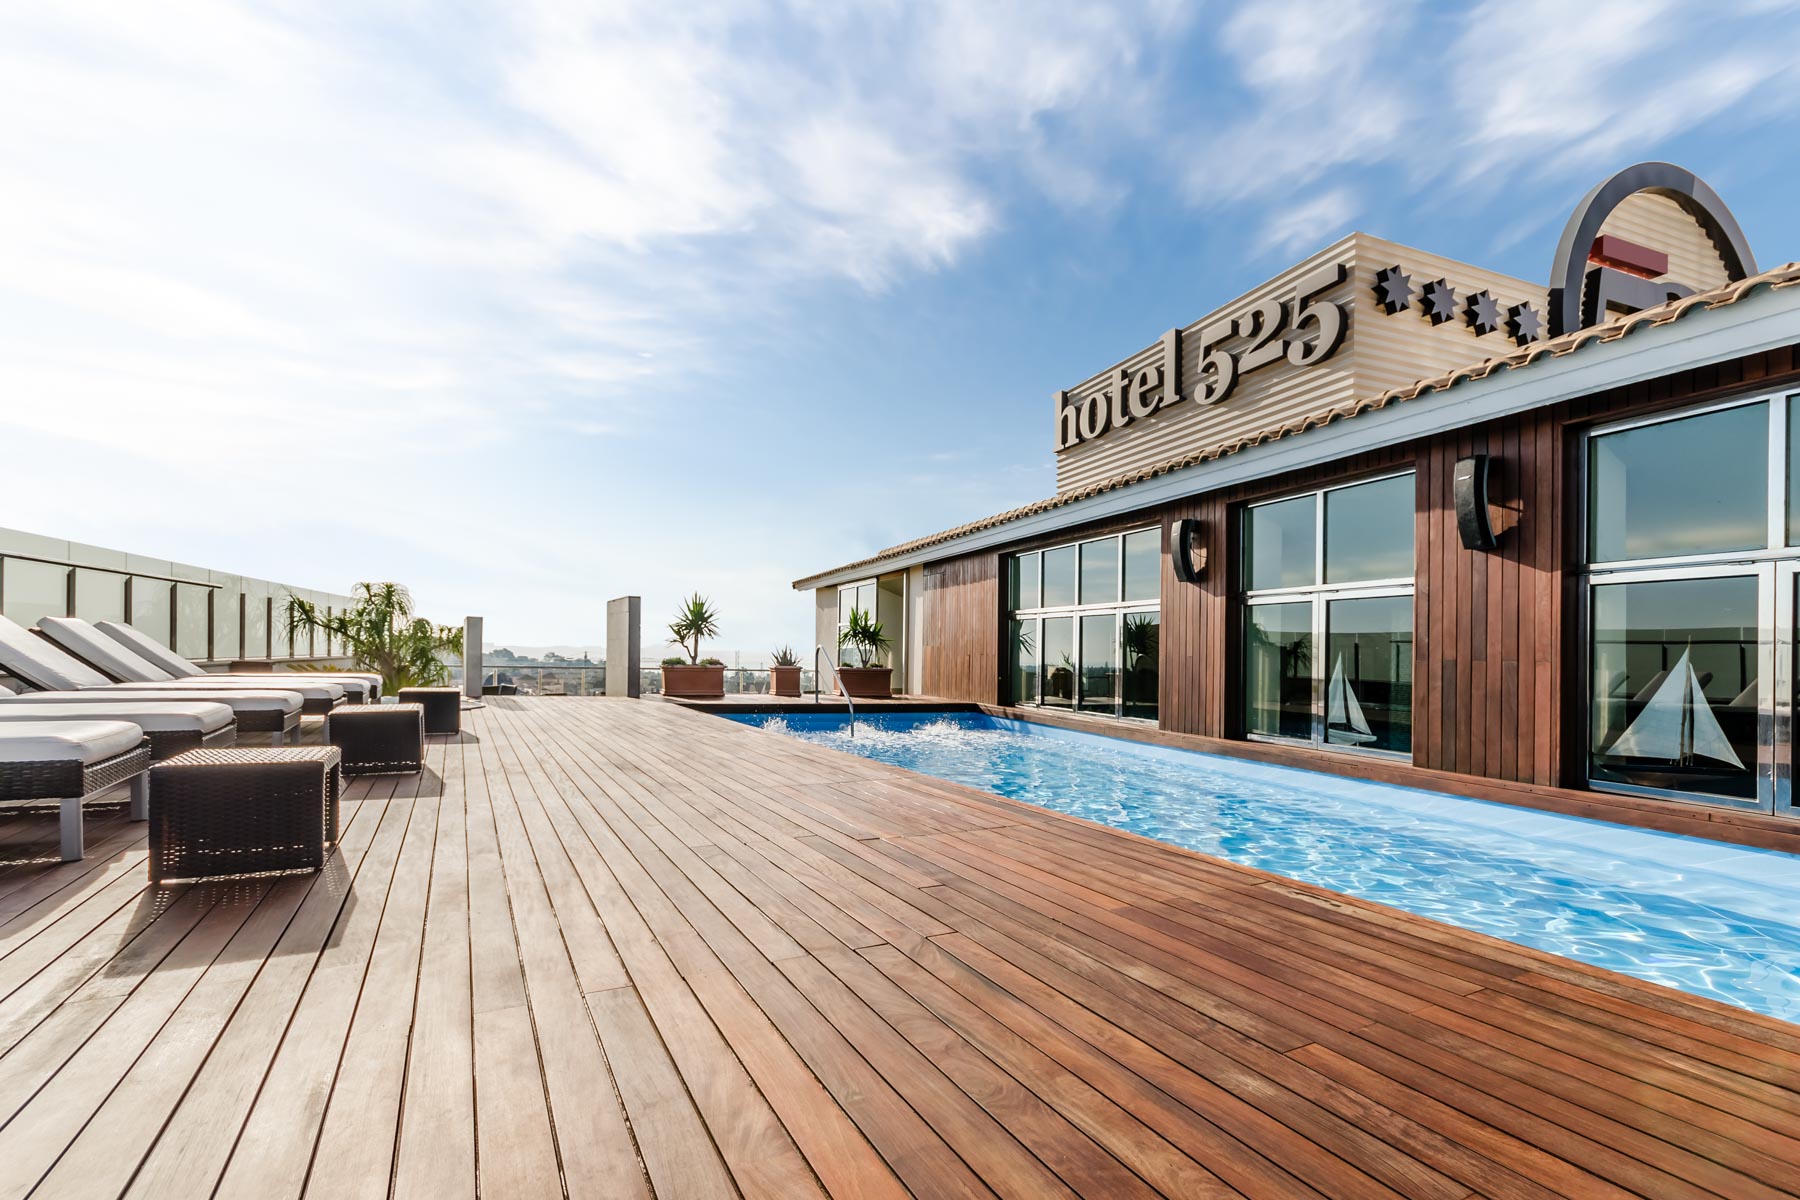 Rooftop swimming pool at Hotel 525 in Murcia, Spain.